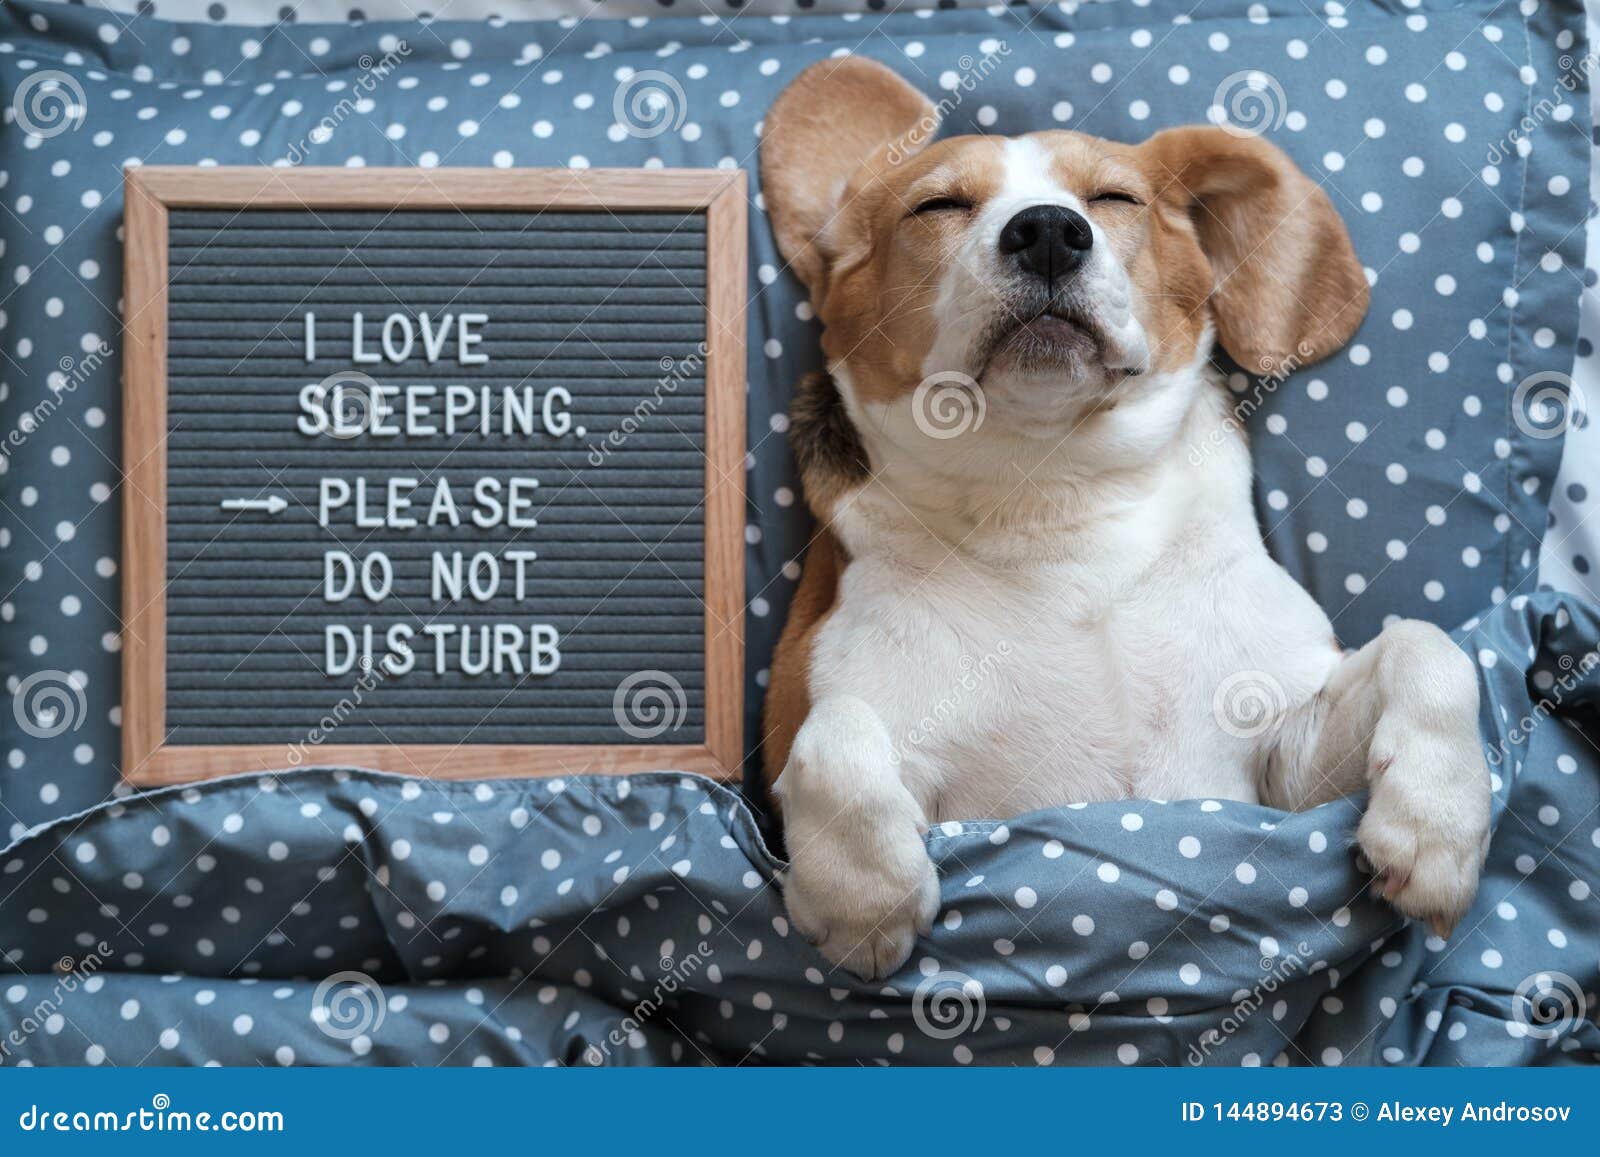 Dog Beagle Funny Sleeping On The Pillow Next To The Board With The  Inscription I Love To Sleep . Please Do Not Disturb Stock Image - Image of  disturb, felt: 144894673